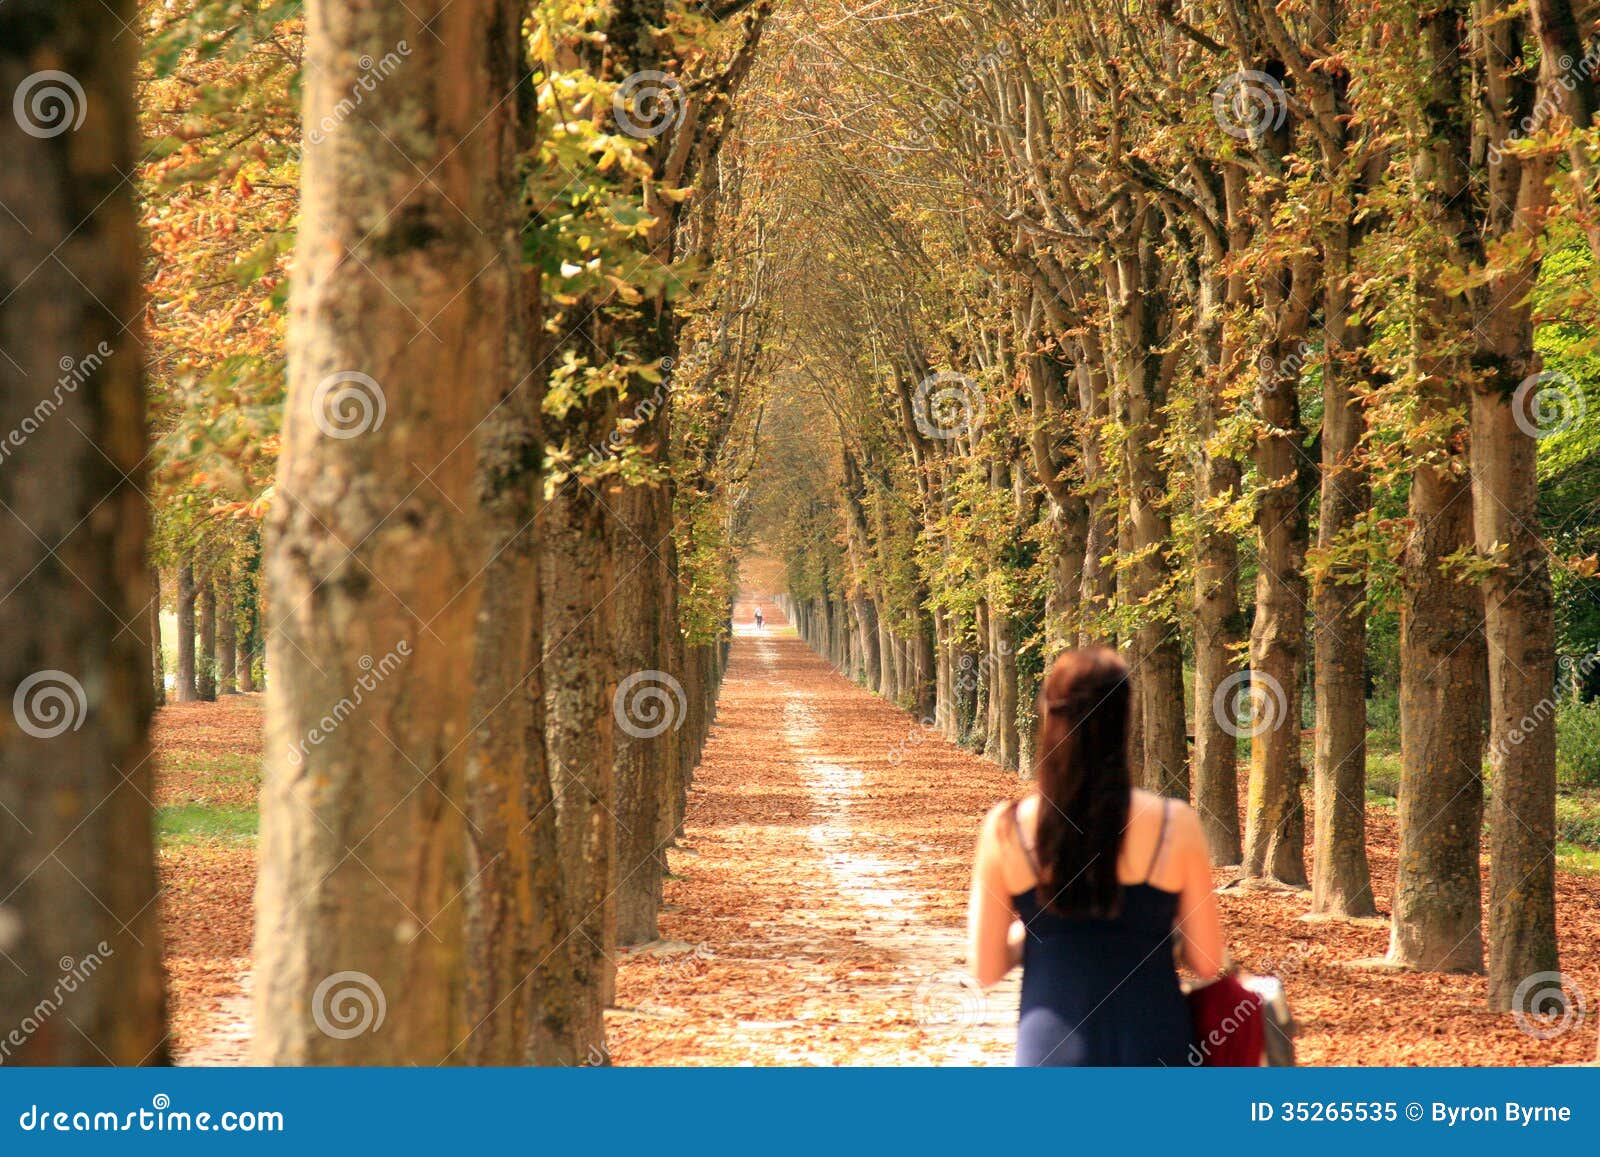 long wooded path with a woman walking down it